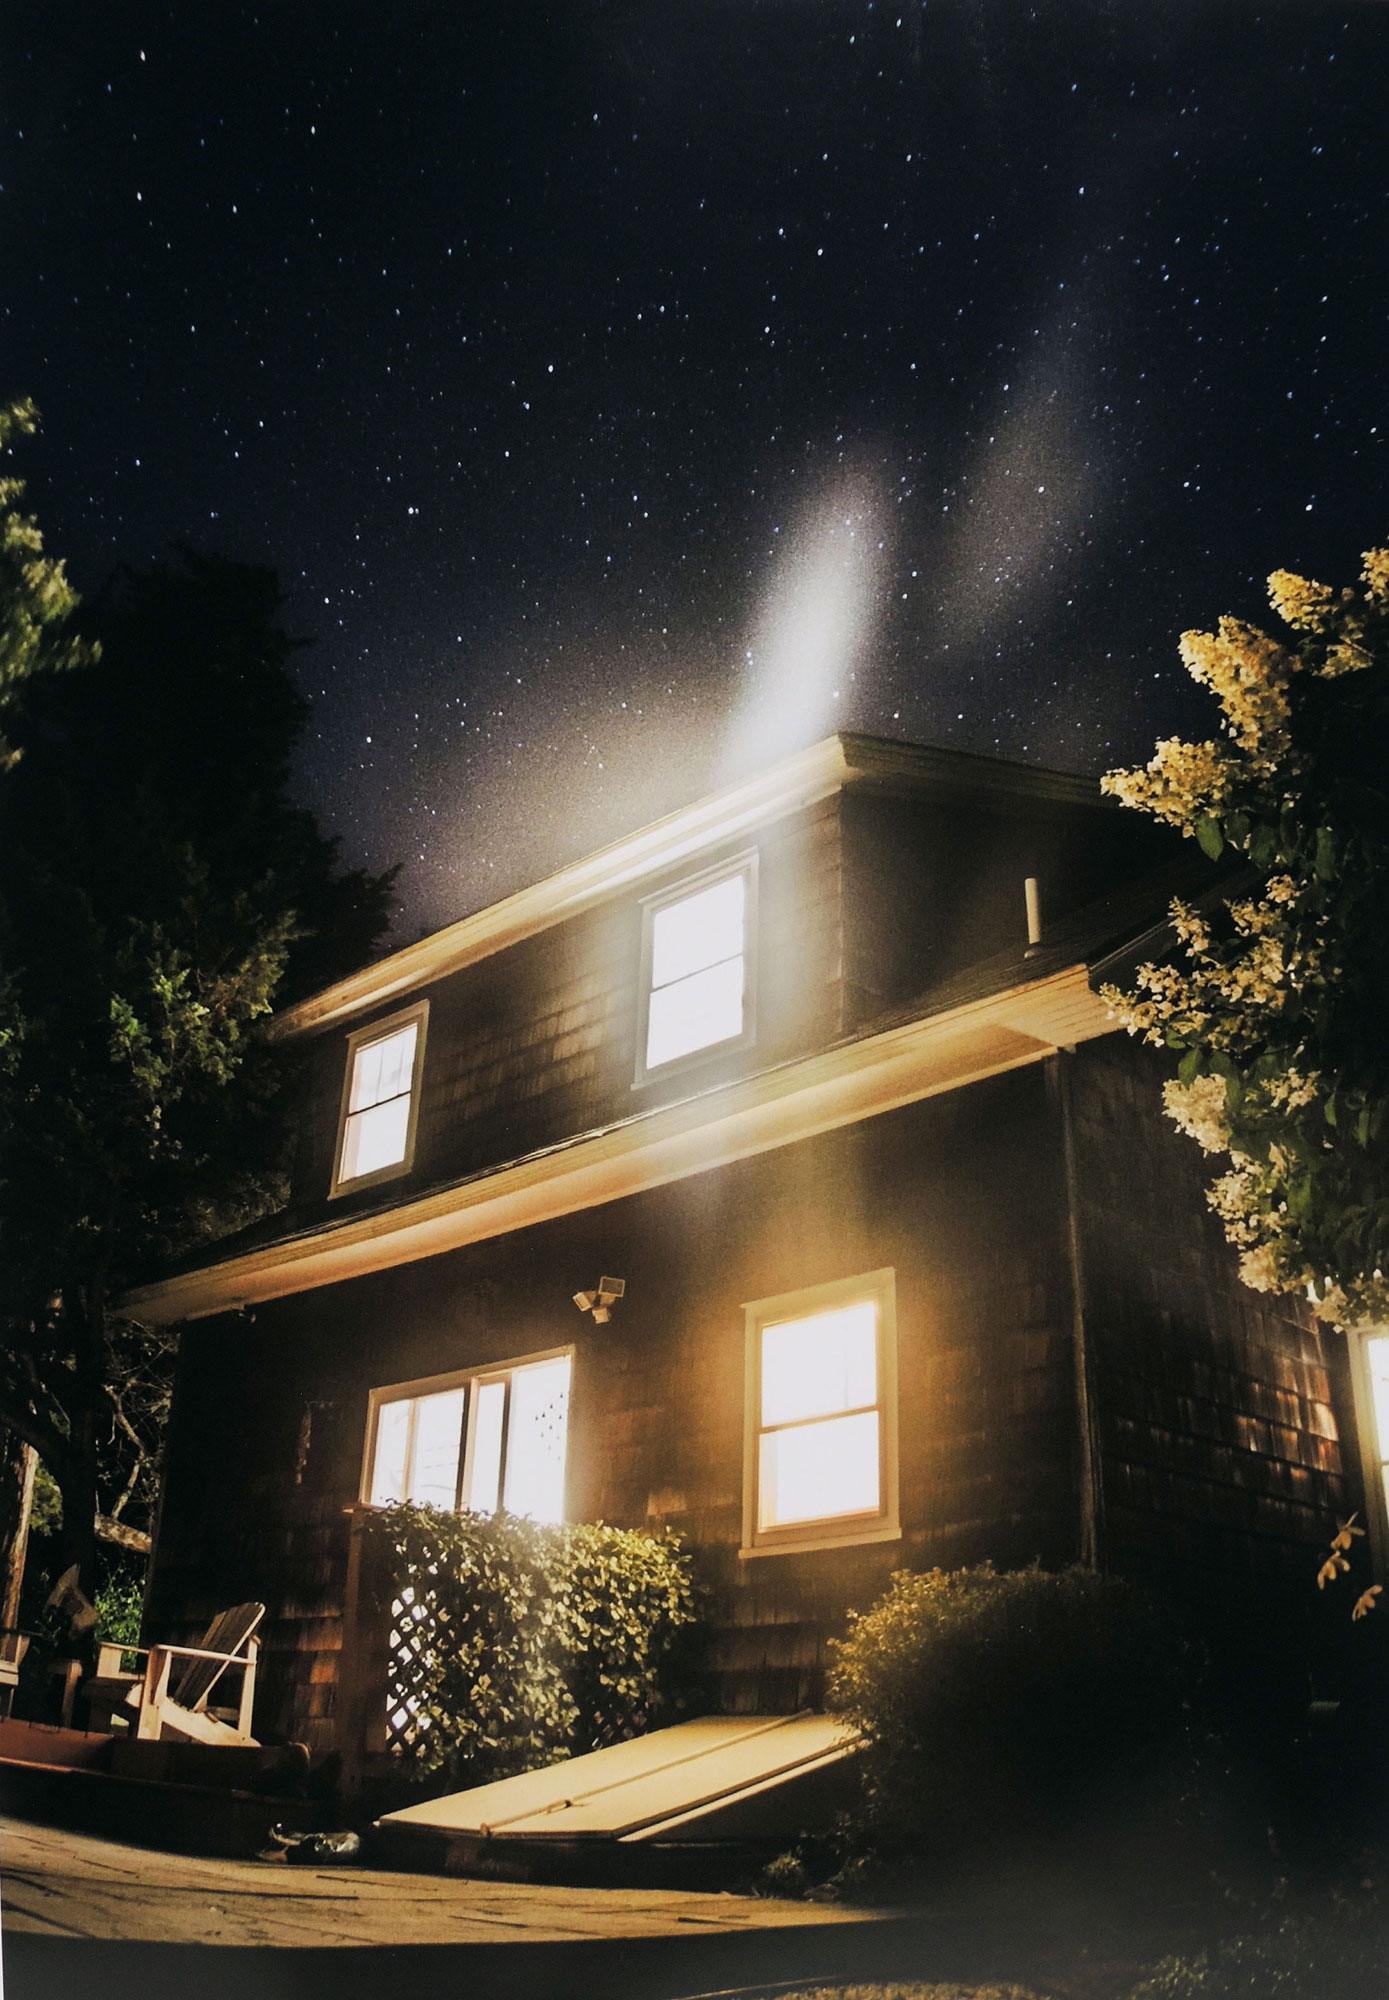 A photograph by Gabrielle Robinson of a house illuminated from the inside on a starry night